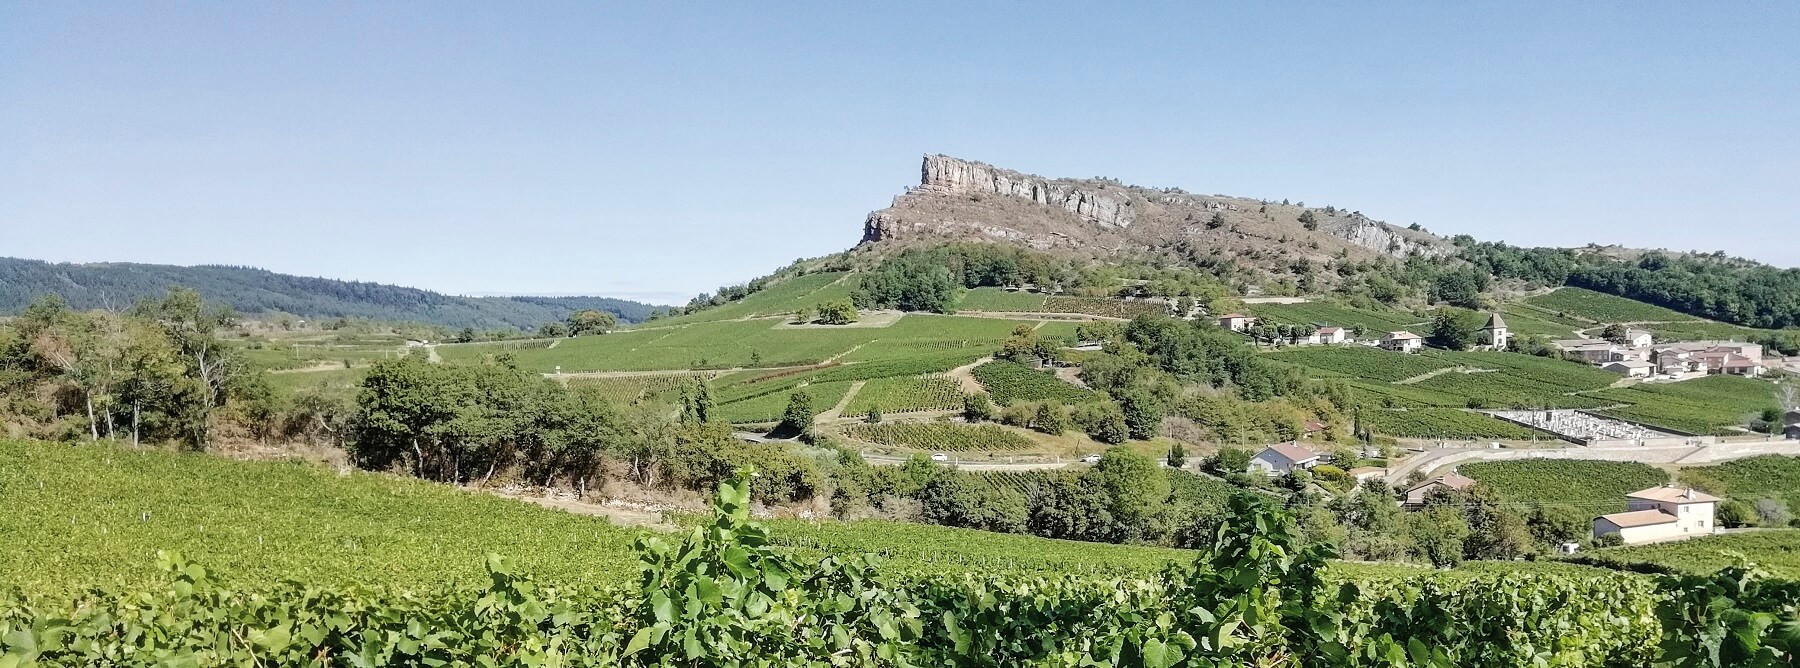  Burgundy and Beaujolais wines : a beautiful vintage 2019